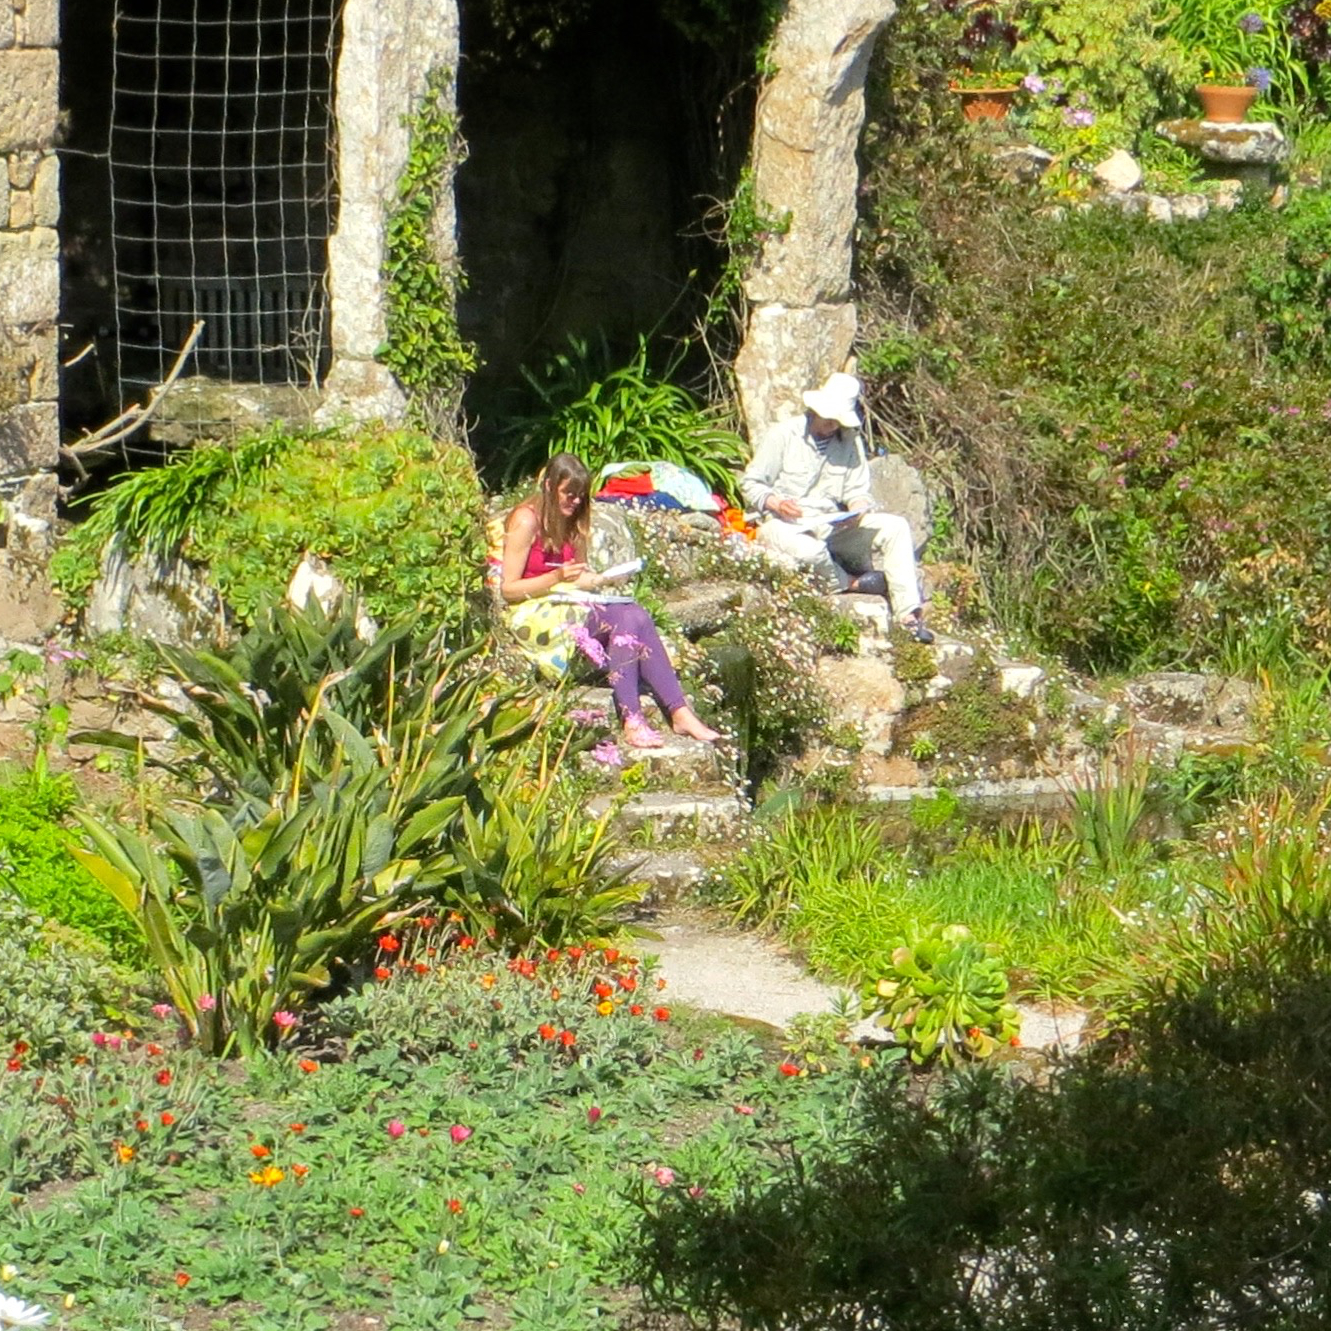 Cornish artists Joanne Short and John Dyer painting in the Tresco Abbey Gardens in Cornwall